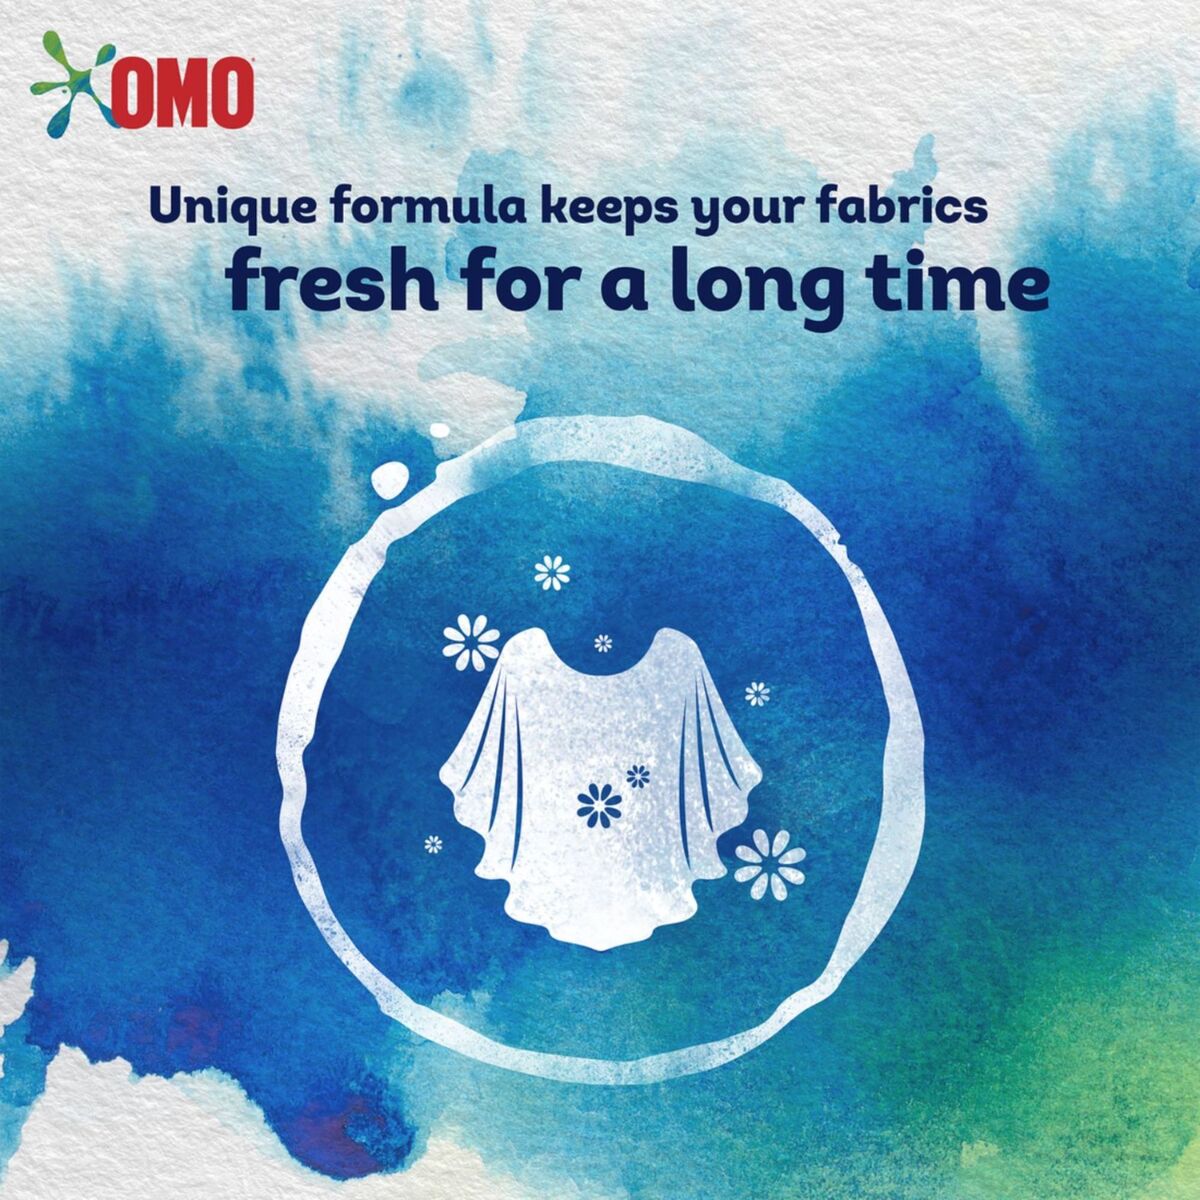 Omo Automatic Anti-Bacterial Washing Powder Touch of Oud 2.25 kg